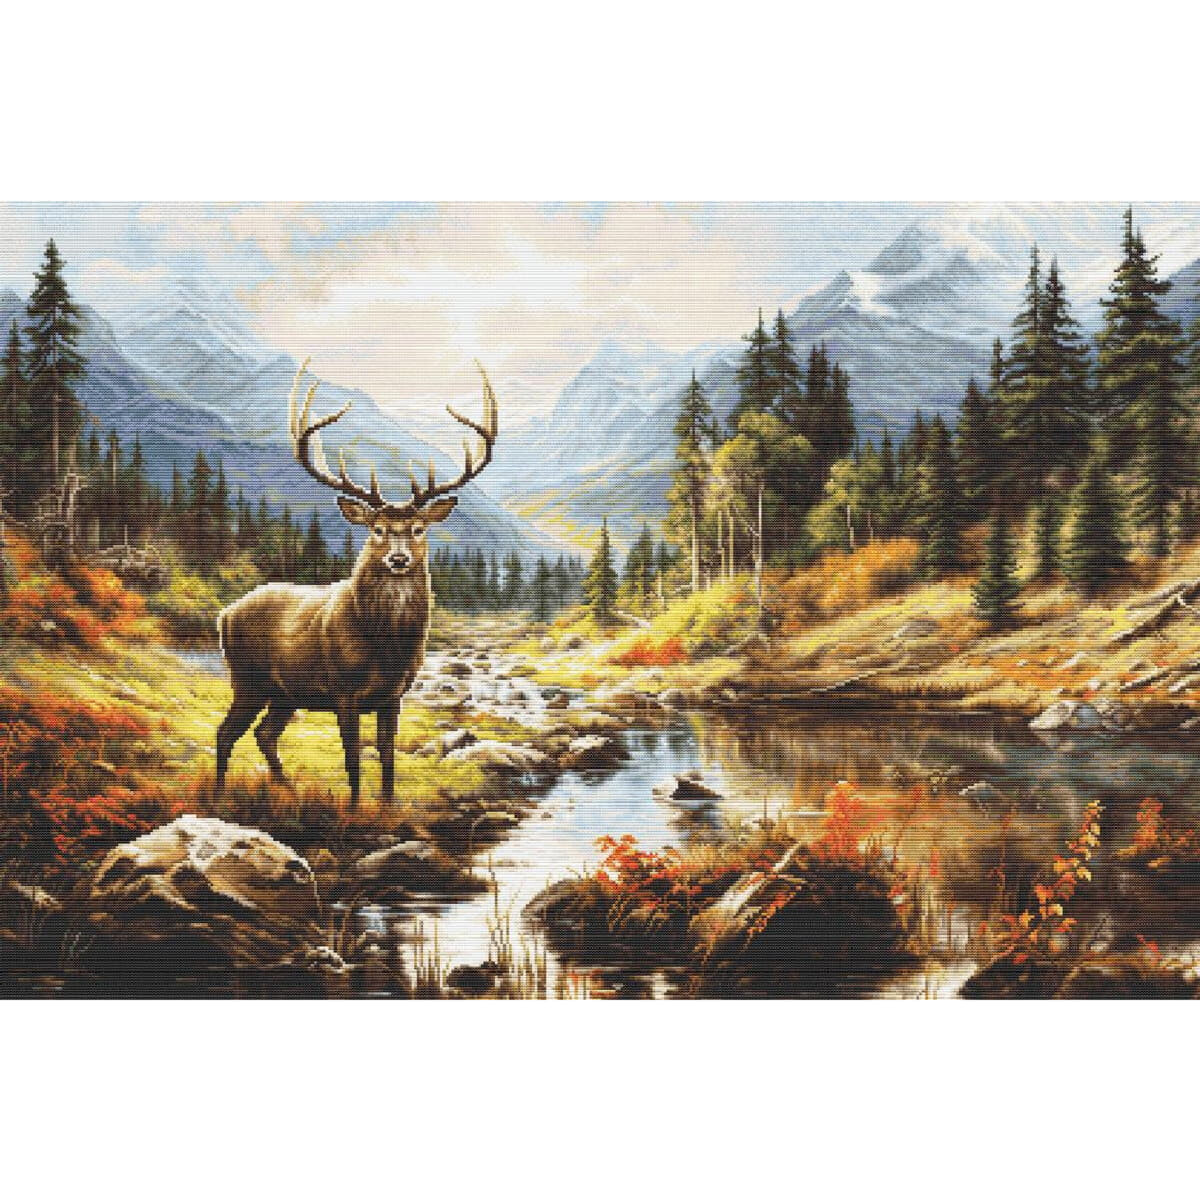 A majestic stag with large antlers stands by a stream in...